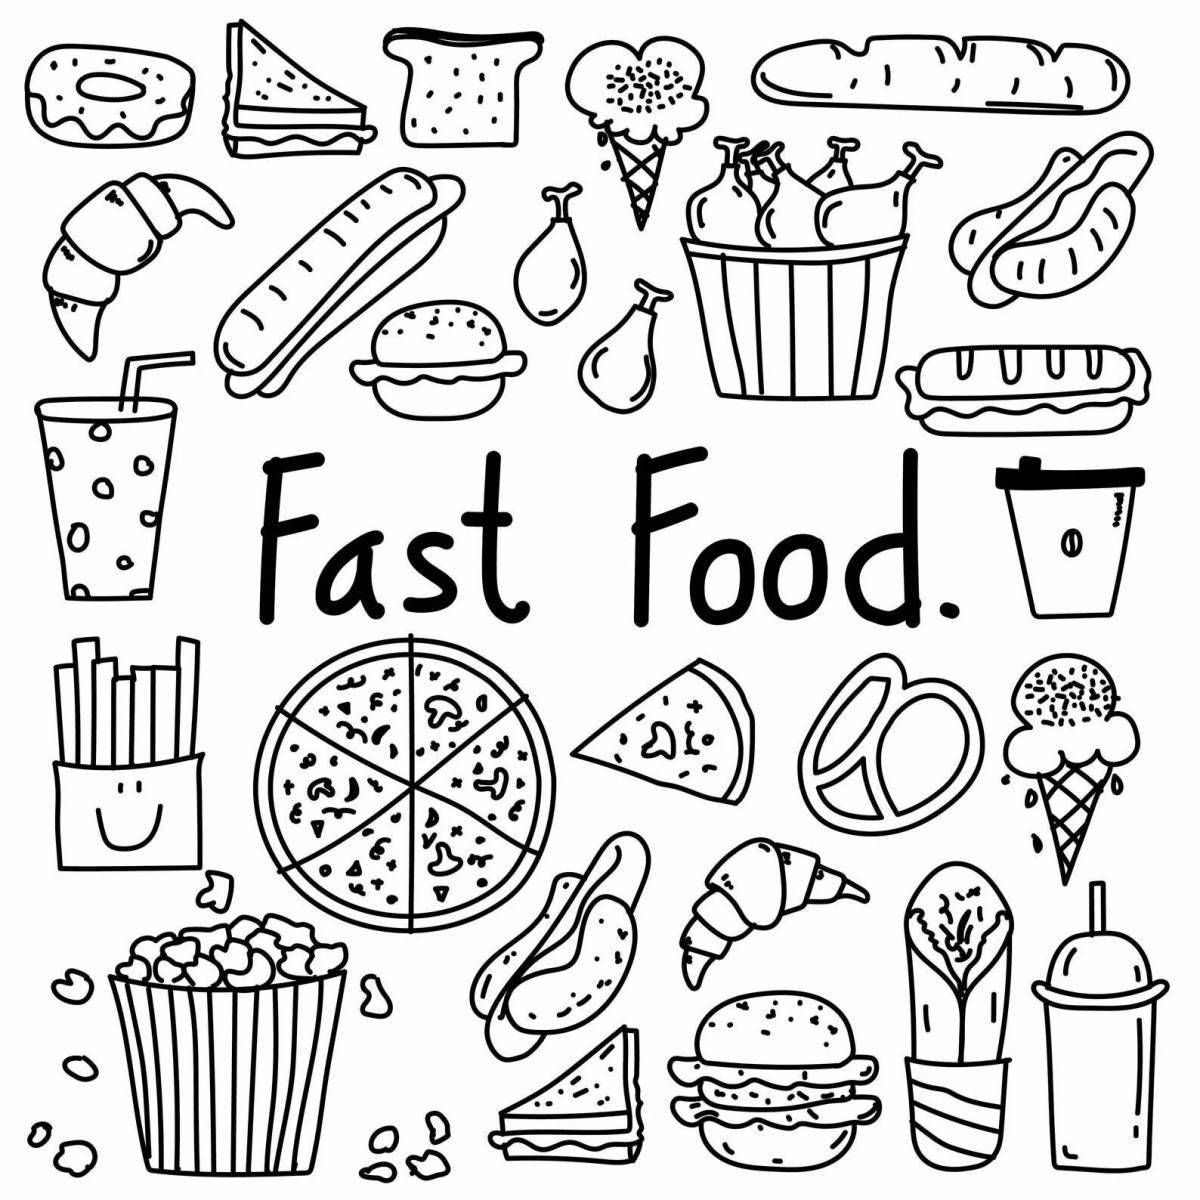 Fun food stickers coloring page